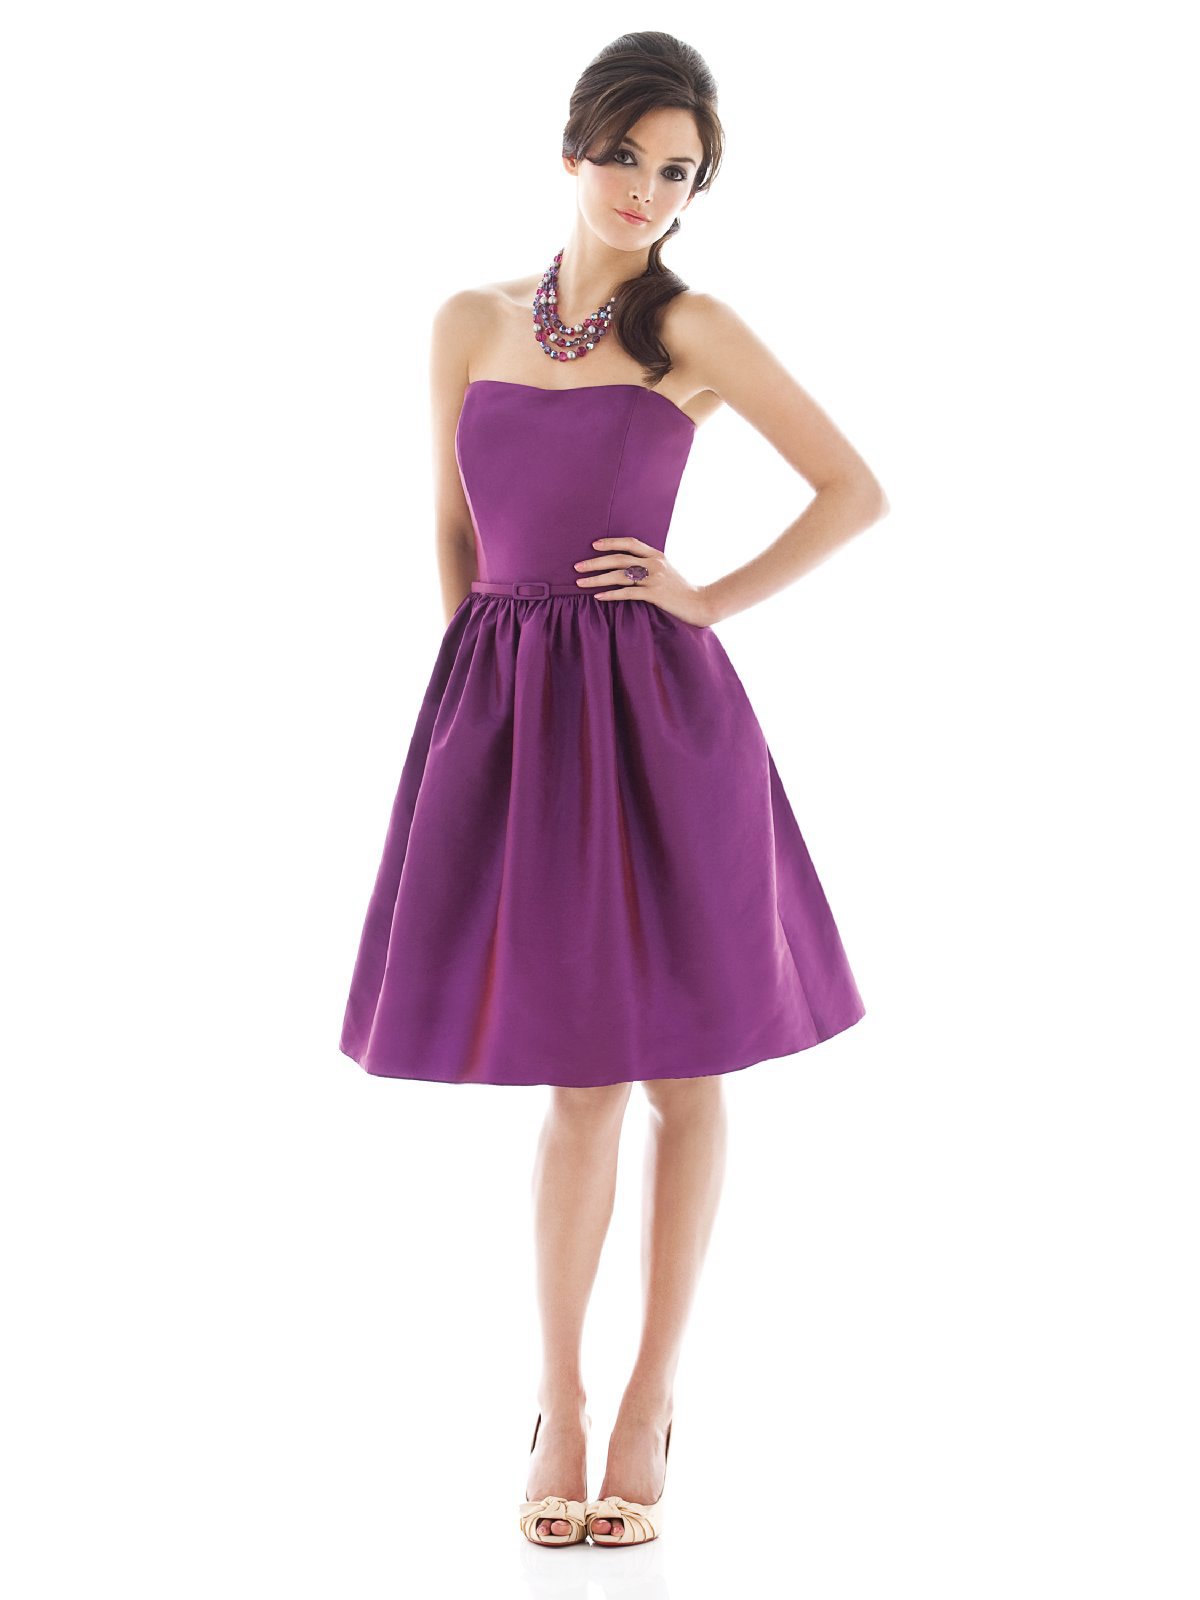 Purple A Line Strapless Zipper Knee Length Satin Prom Dresses With Belt And Draped Skirt 